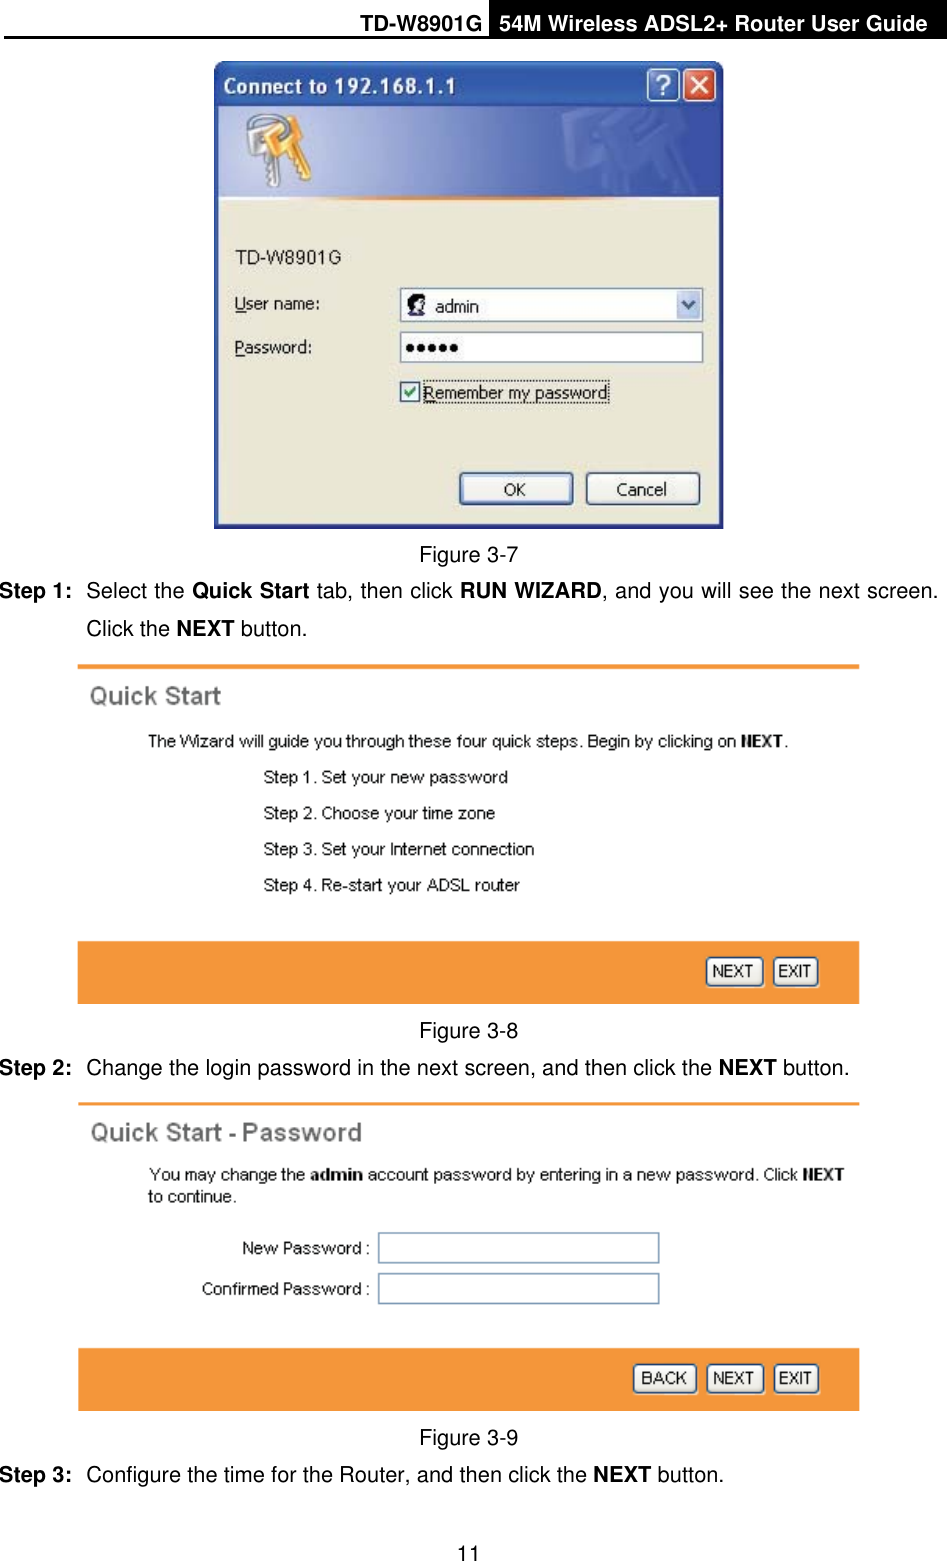 TD-W8901G 54M Wireless ADSL2+ Router User Guide11Figure 3-7Step 1:  Select the Quick Start tab, then click RUN WIZARD, and you will see the next screen. Click the NEXT button. Figure 3-8Step 2:  Change the login password in the next screen, and then click the NEXT button. Figure 3-9Step 3:  Configure the time for the Router, and then click the NEXT button. 